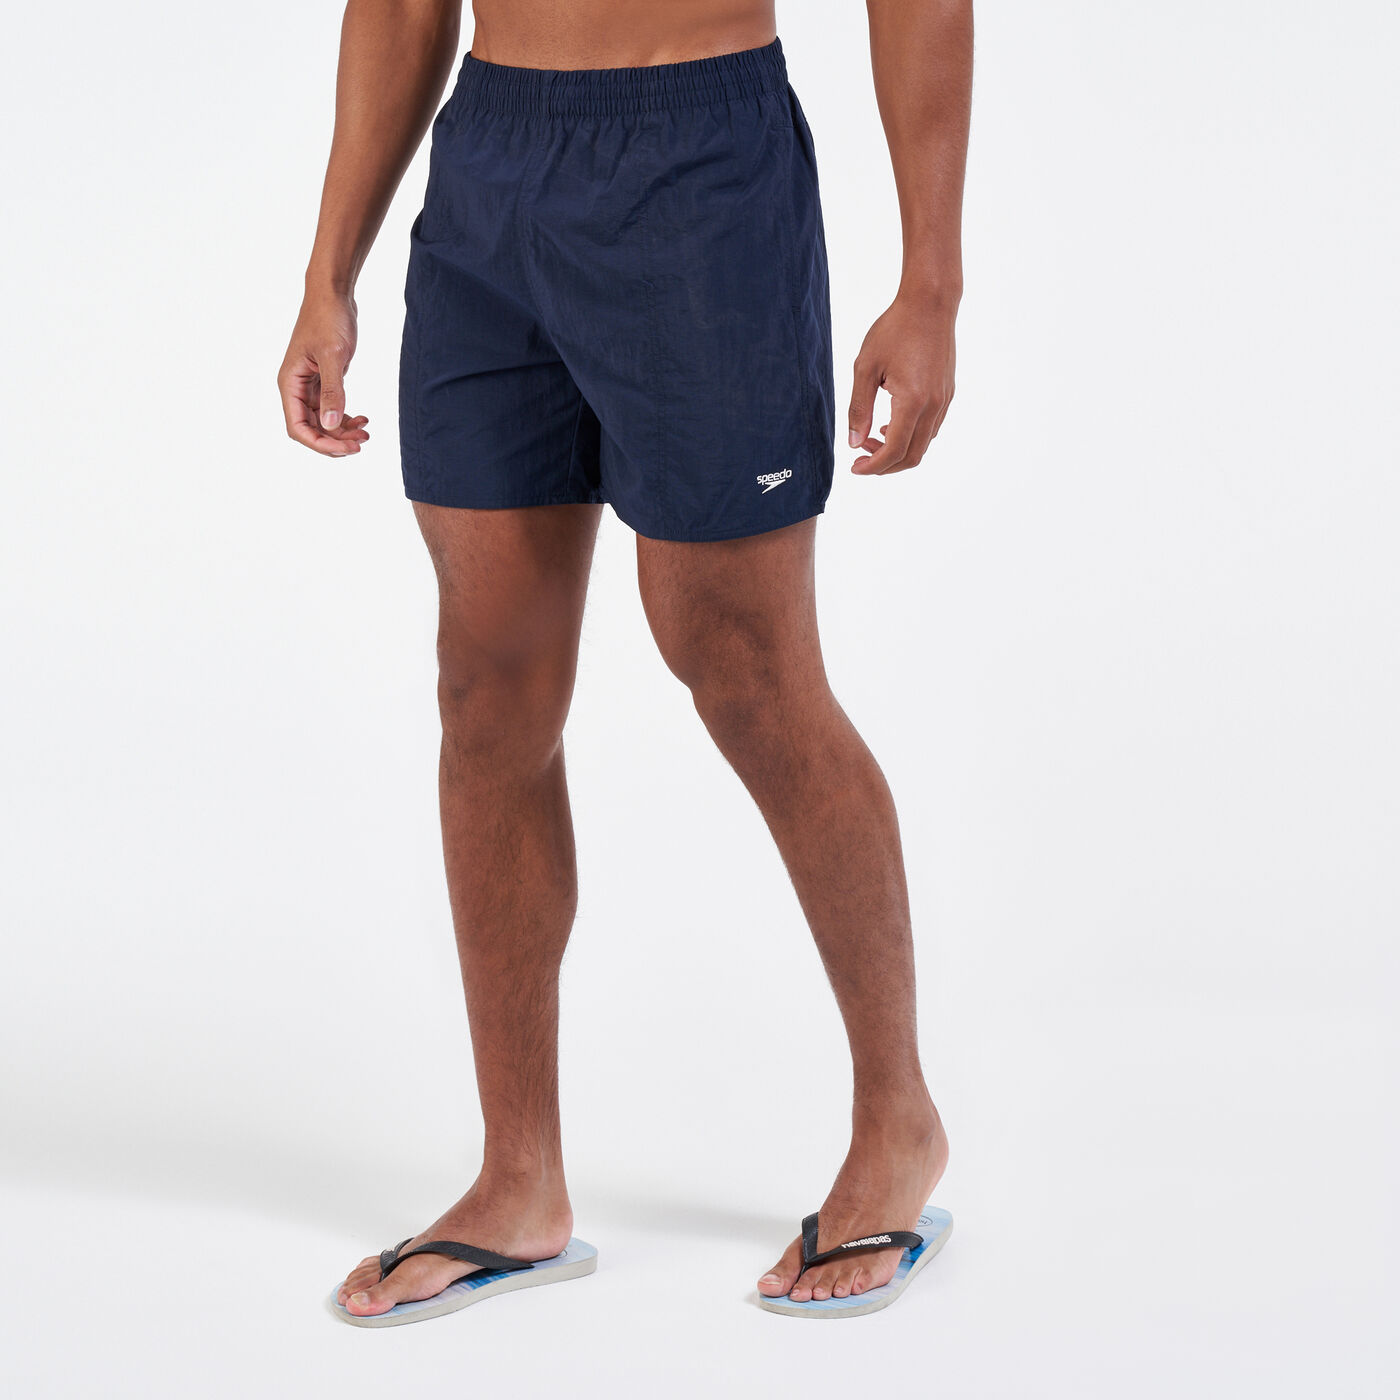 Men's Solid Leisure 16-Inch Swimming Shorts